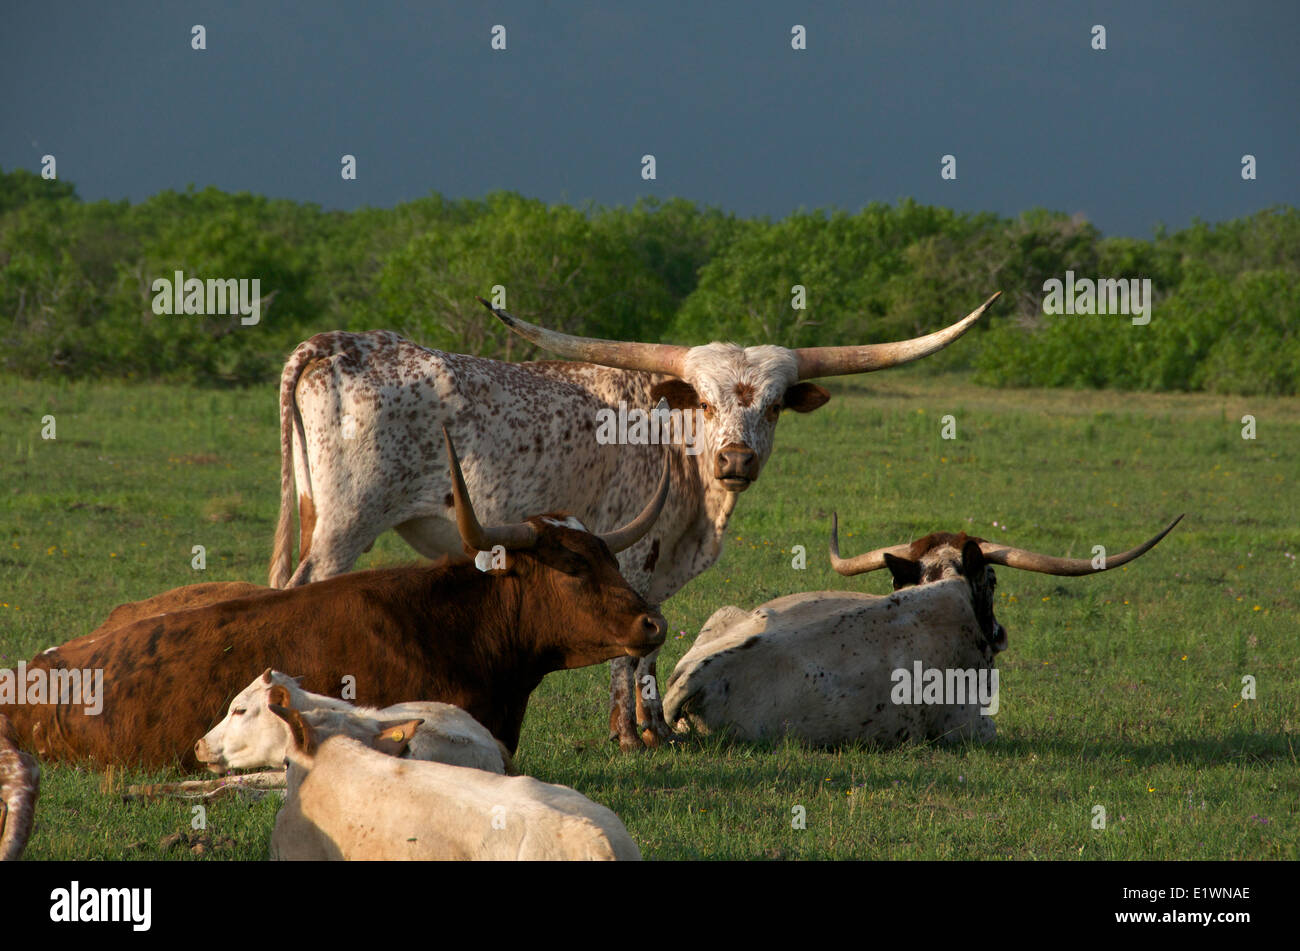 Herd of Texas Longhorn cattle at rest in summer green field. Texas,  North America. Stock Photo